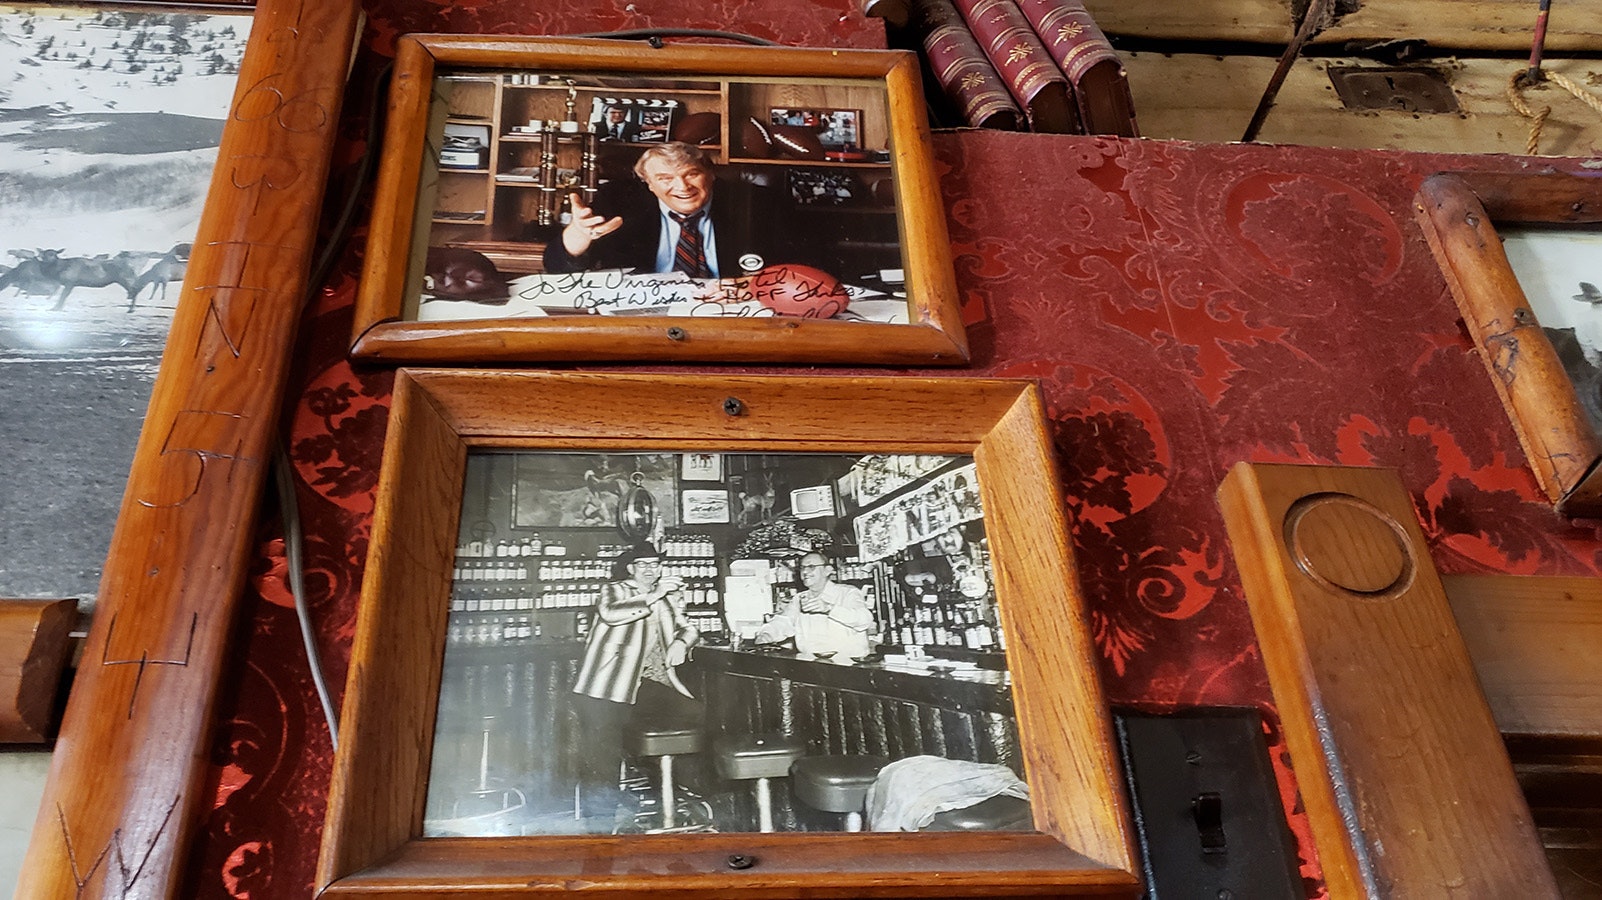 A photo that shows the bar as it used to look at The Virginian under another signed by legendary NFL football coach and analyst John Madden.